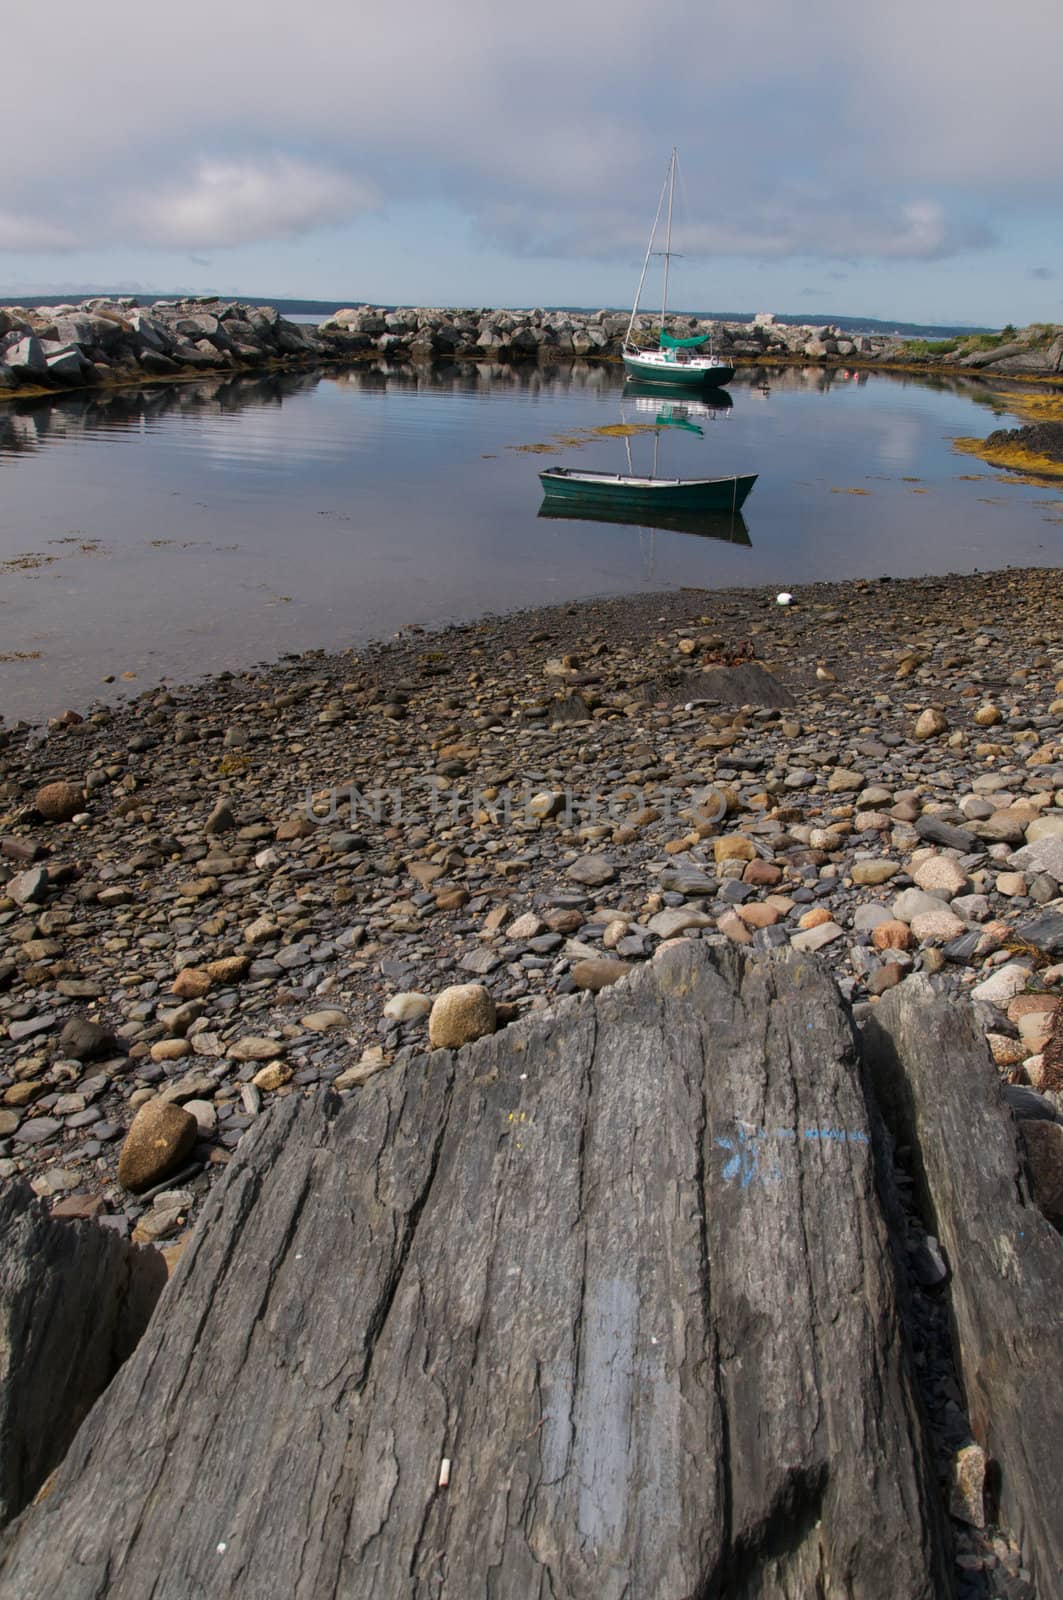 These boats were bobbing in the harbour in Blue Rocks, Nova Scotia, Canada